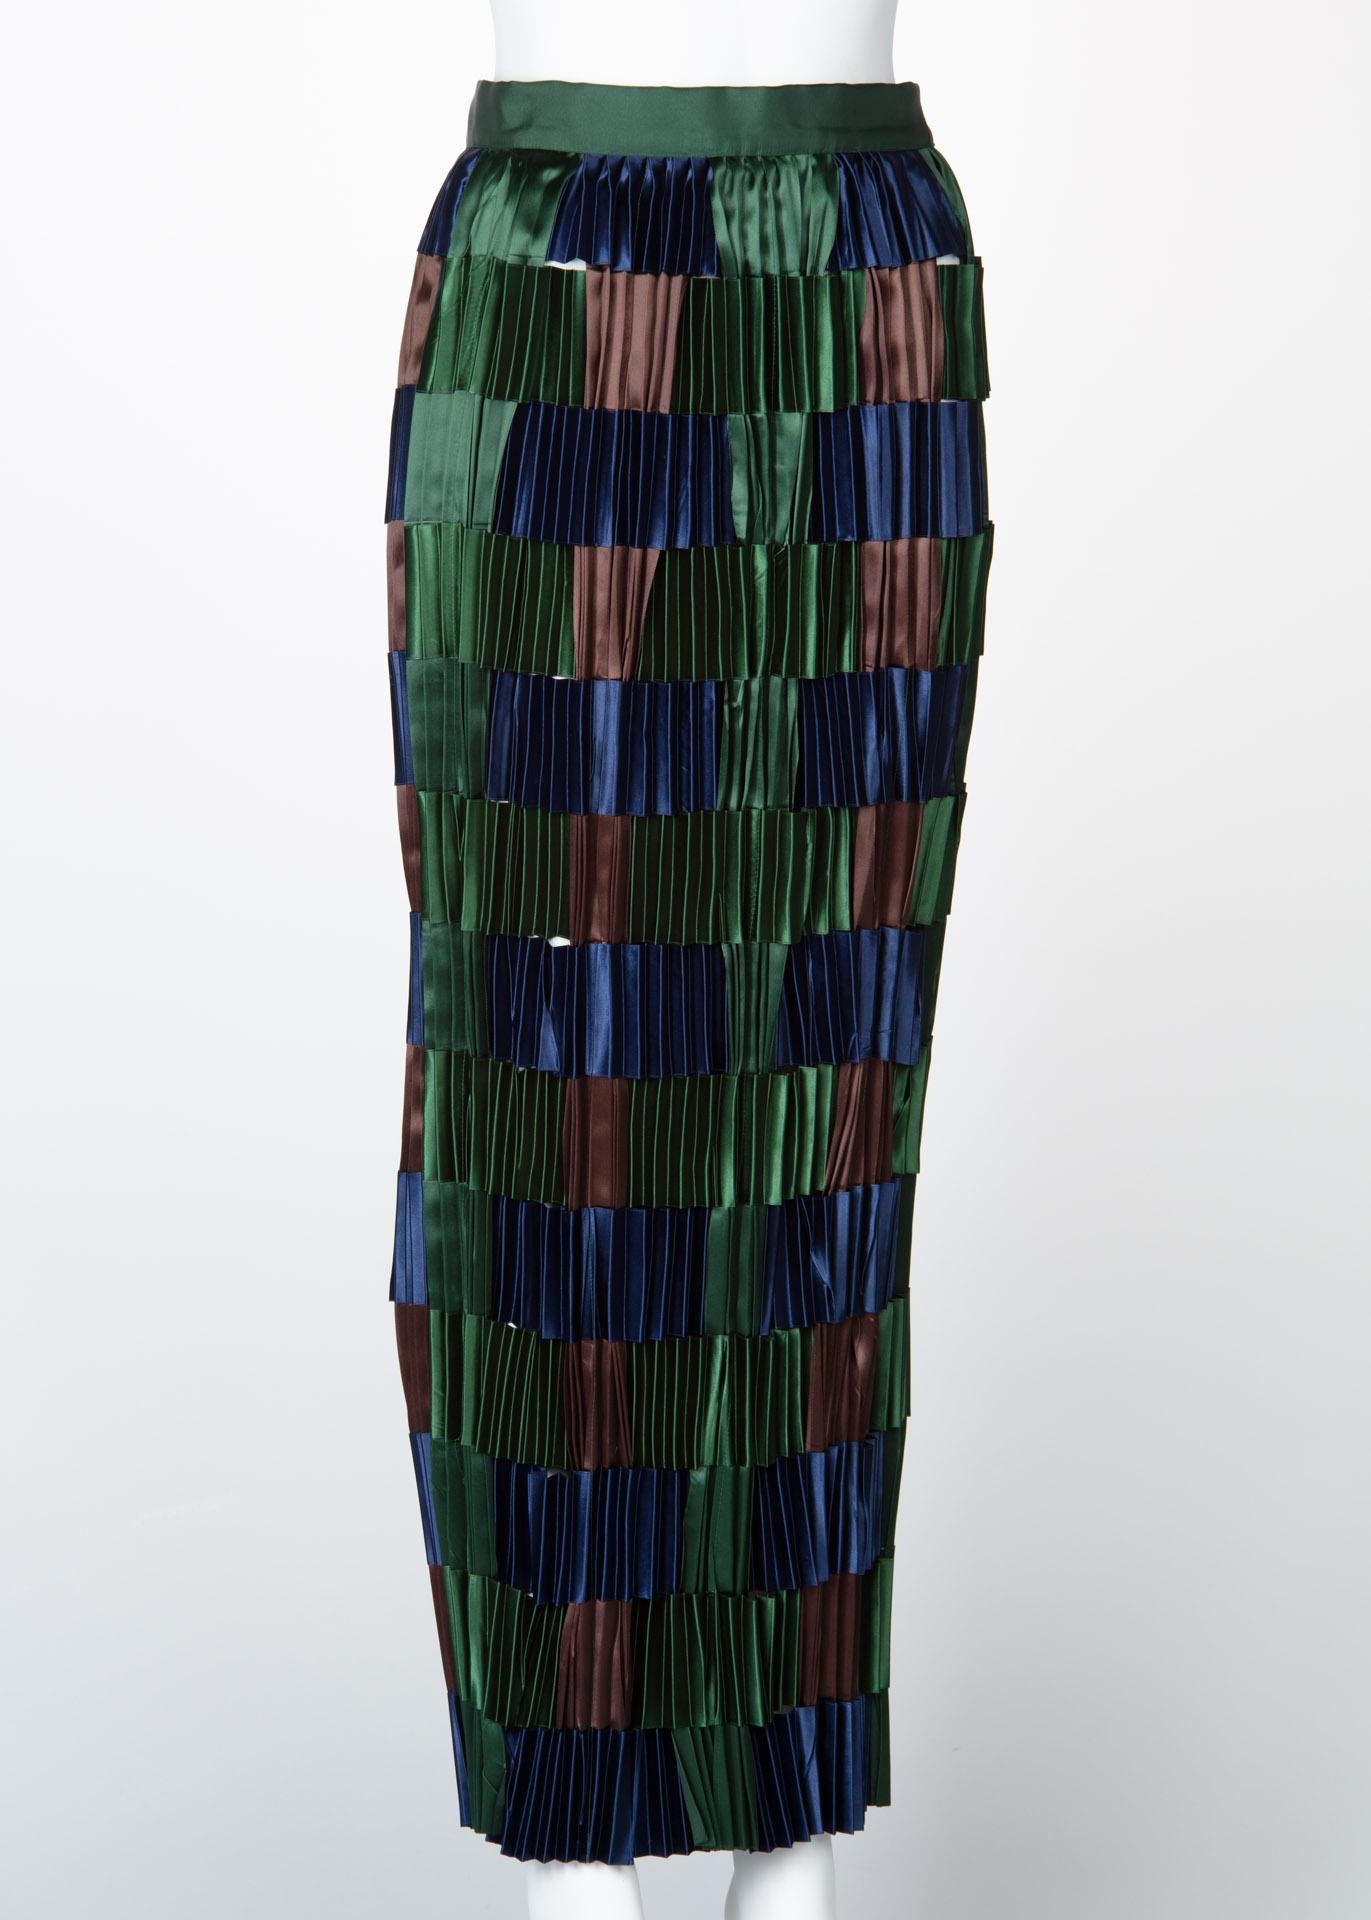 Black Issey Miyake Green Blue Pleated Satin Ribbon Skirt, 1990s  For Sale